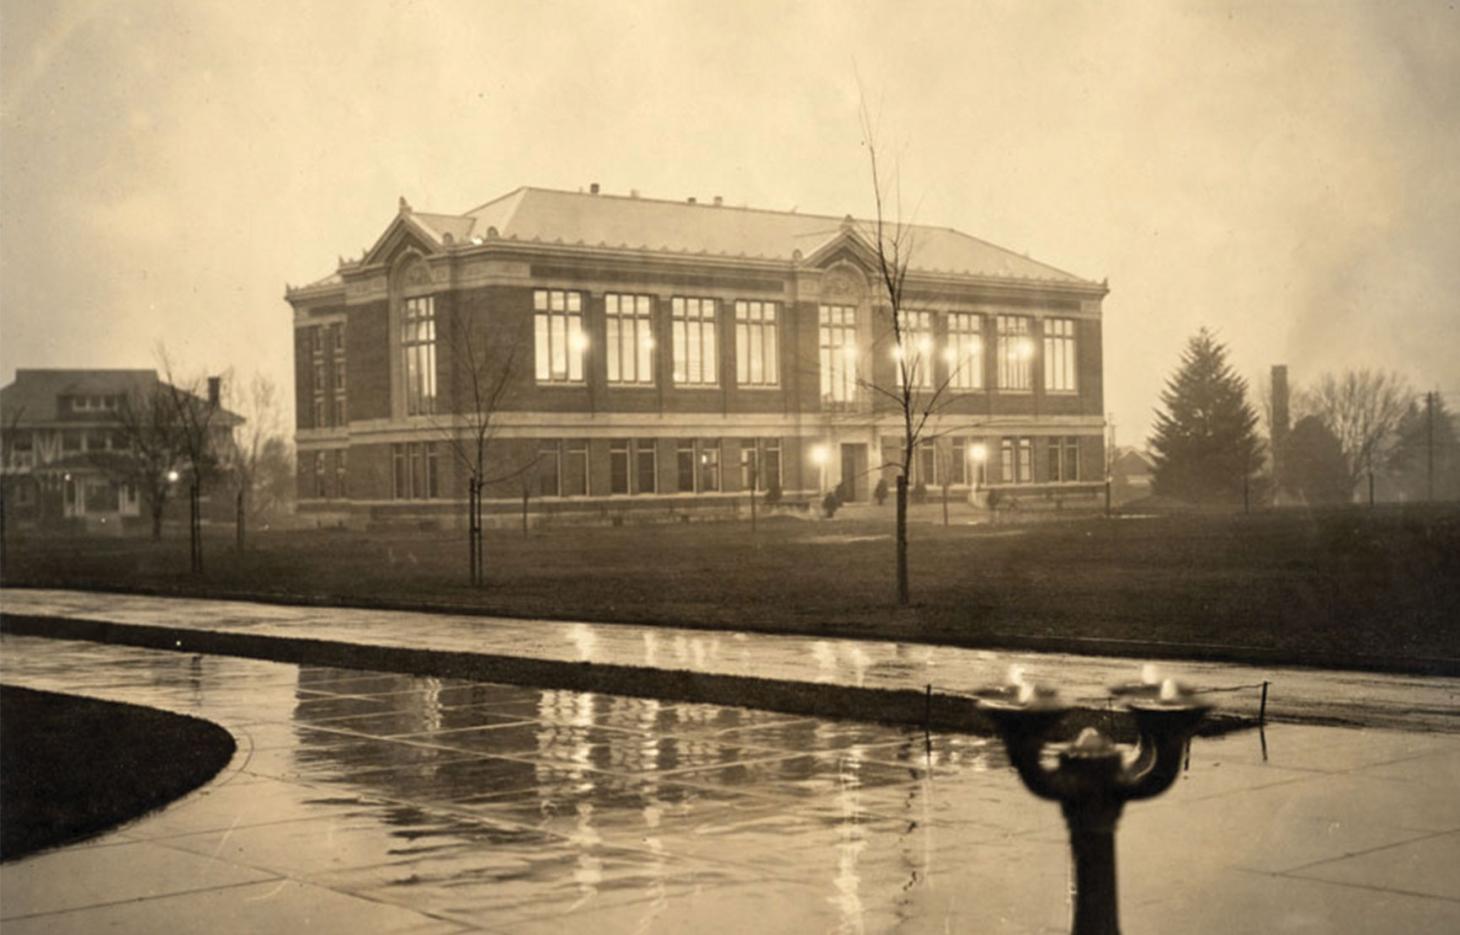 Old film photo of Kidder Hall in 1919